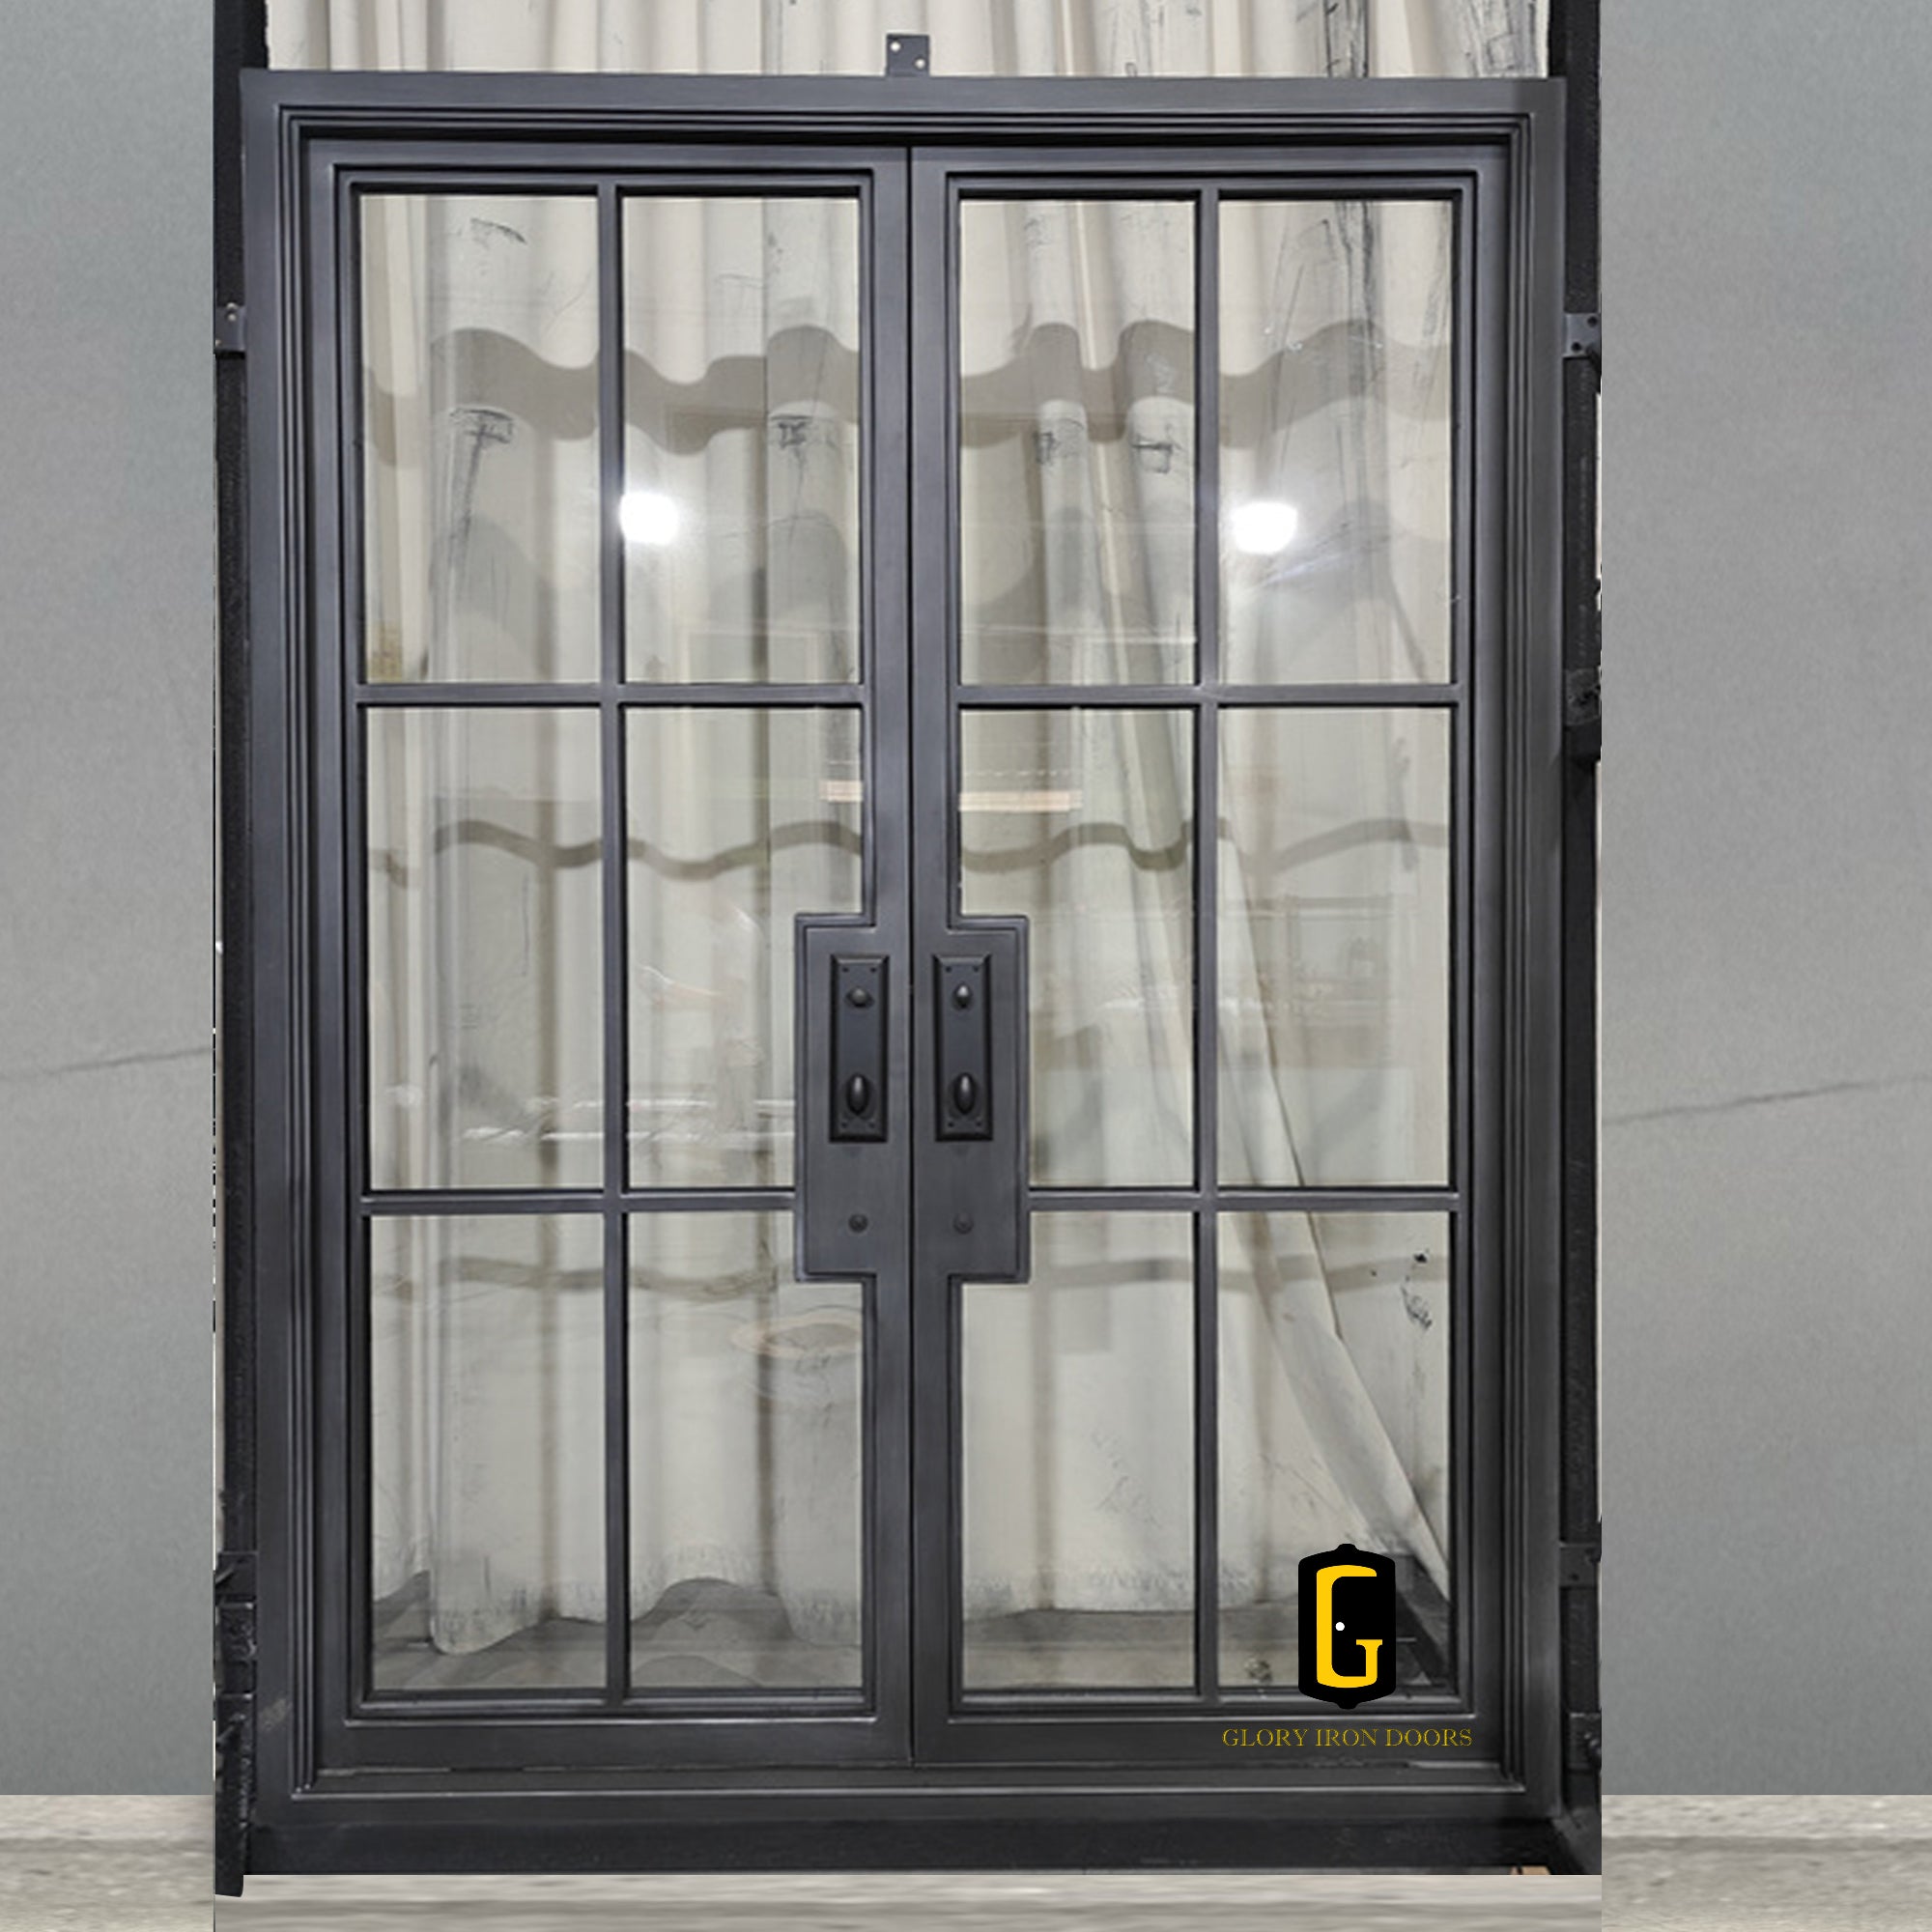 gloryirondoors high quality thermal break iron french double door with low-e glass